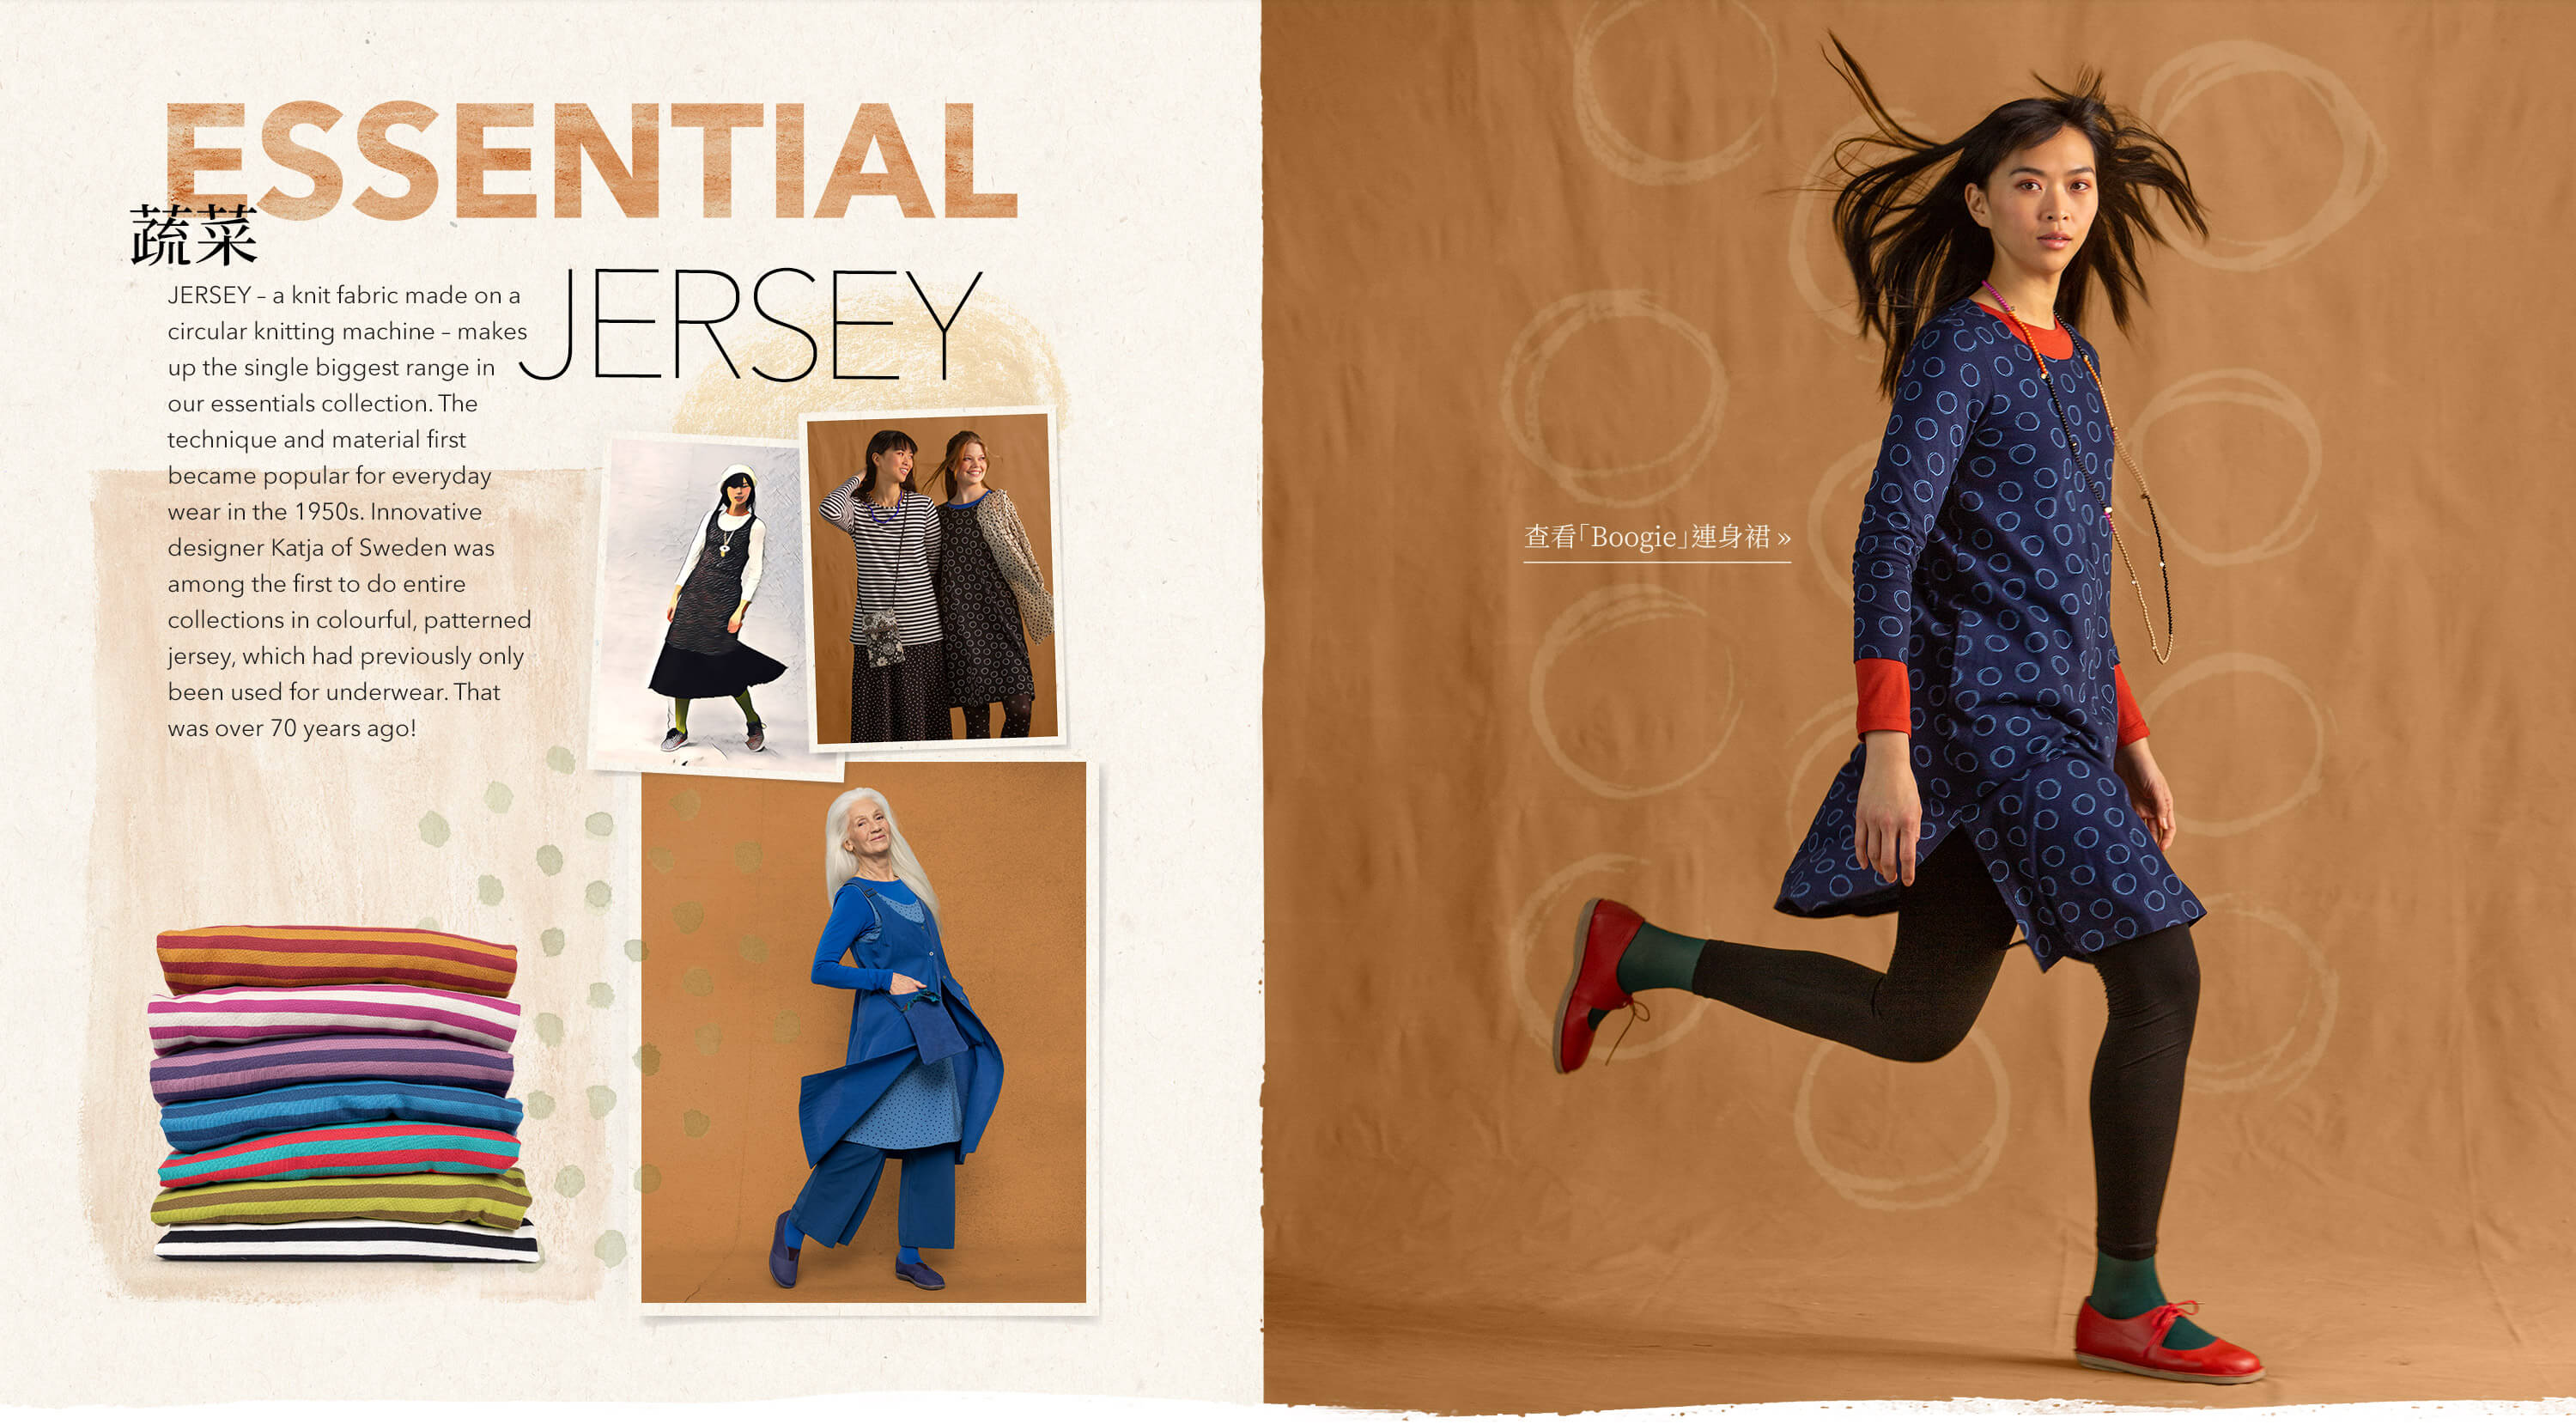 JERSEY – makes up the single biggest range in our essentials collection. 